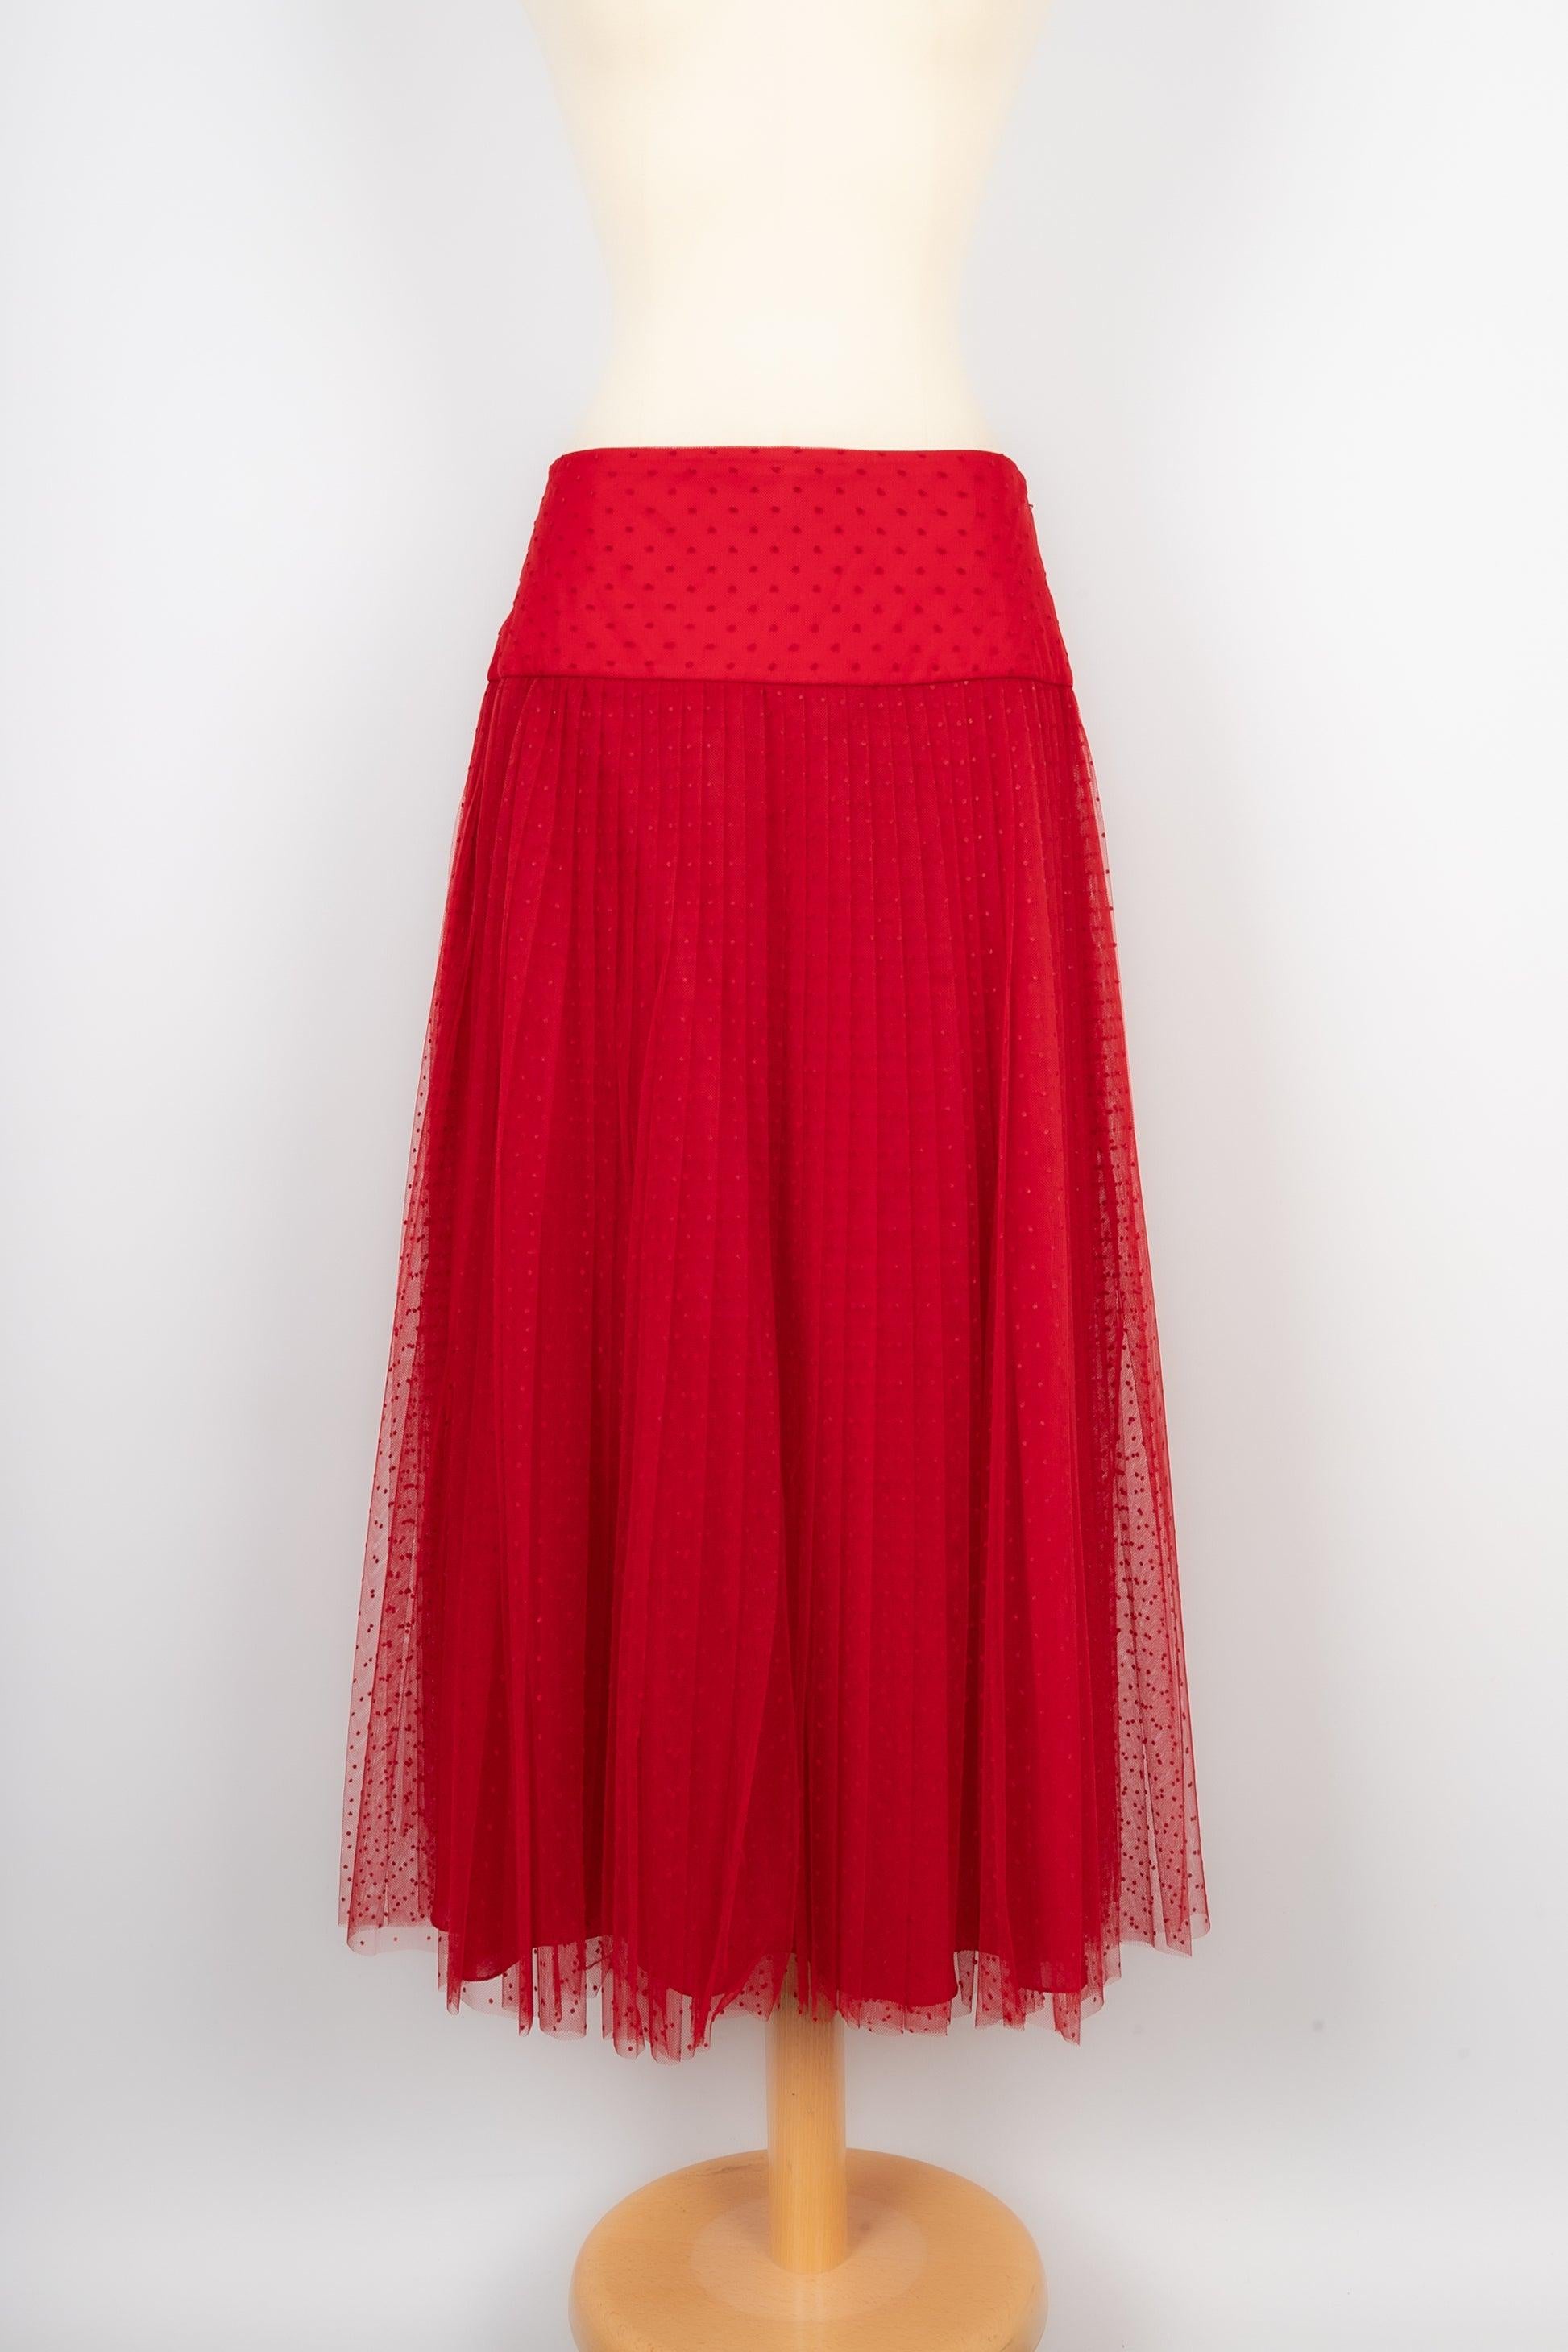 Dior Swiss Dot Long Red Tulle Skirt In Excellent Condition For Sale In SAINT-OUEN-SUR-SEINE, FR